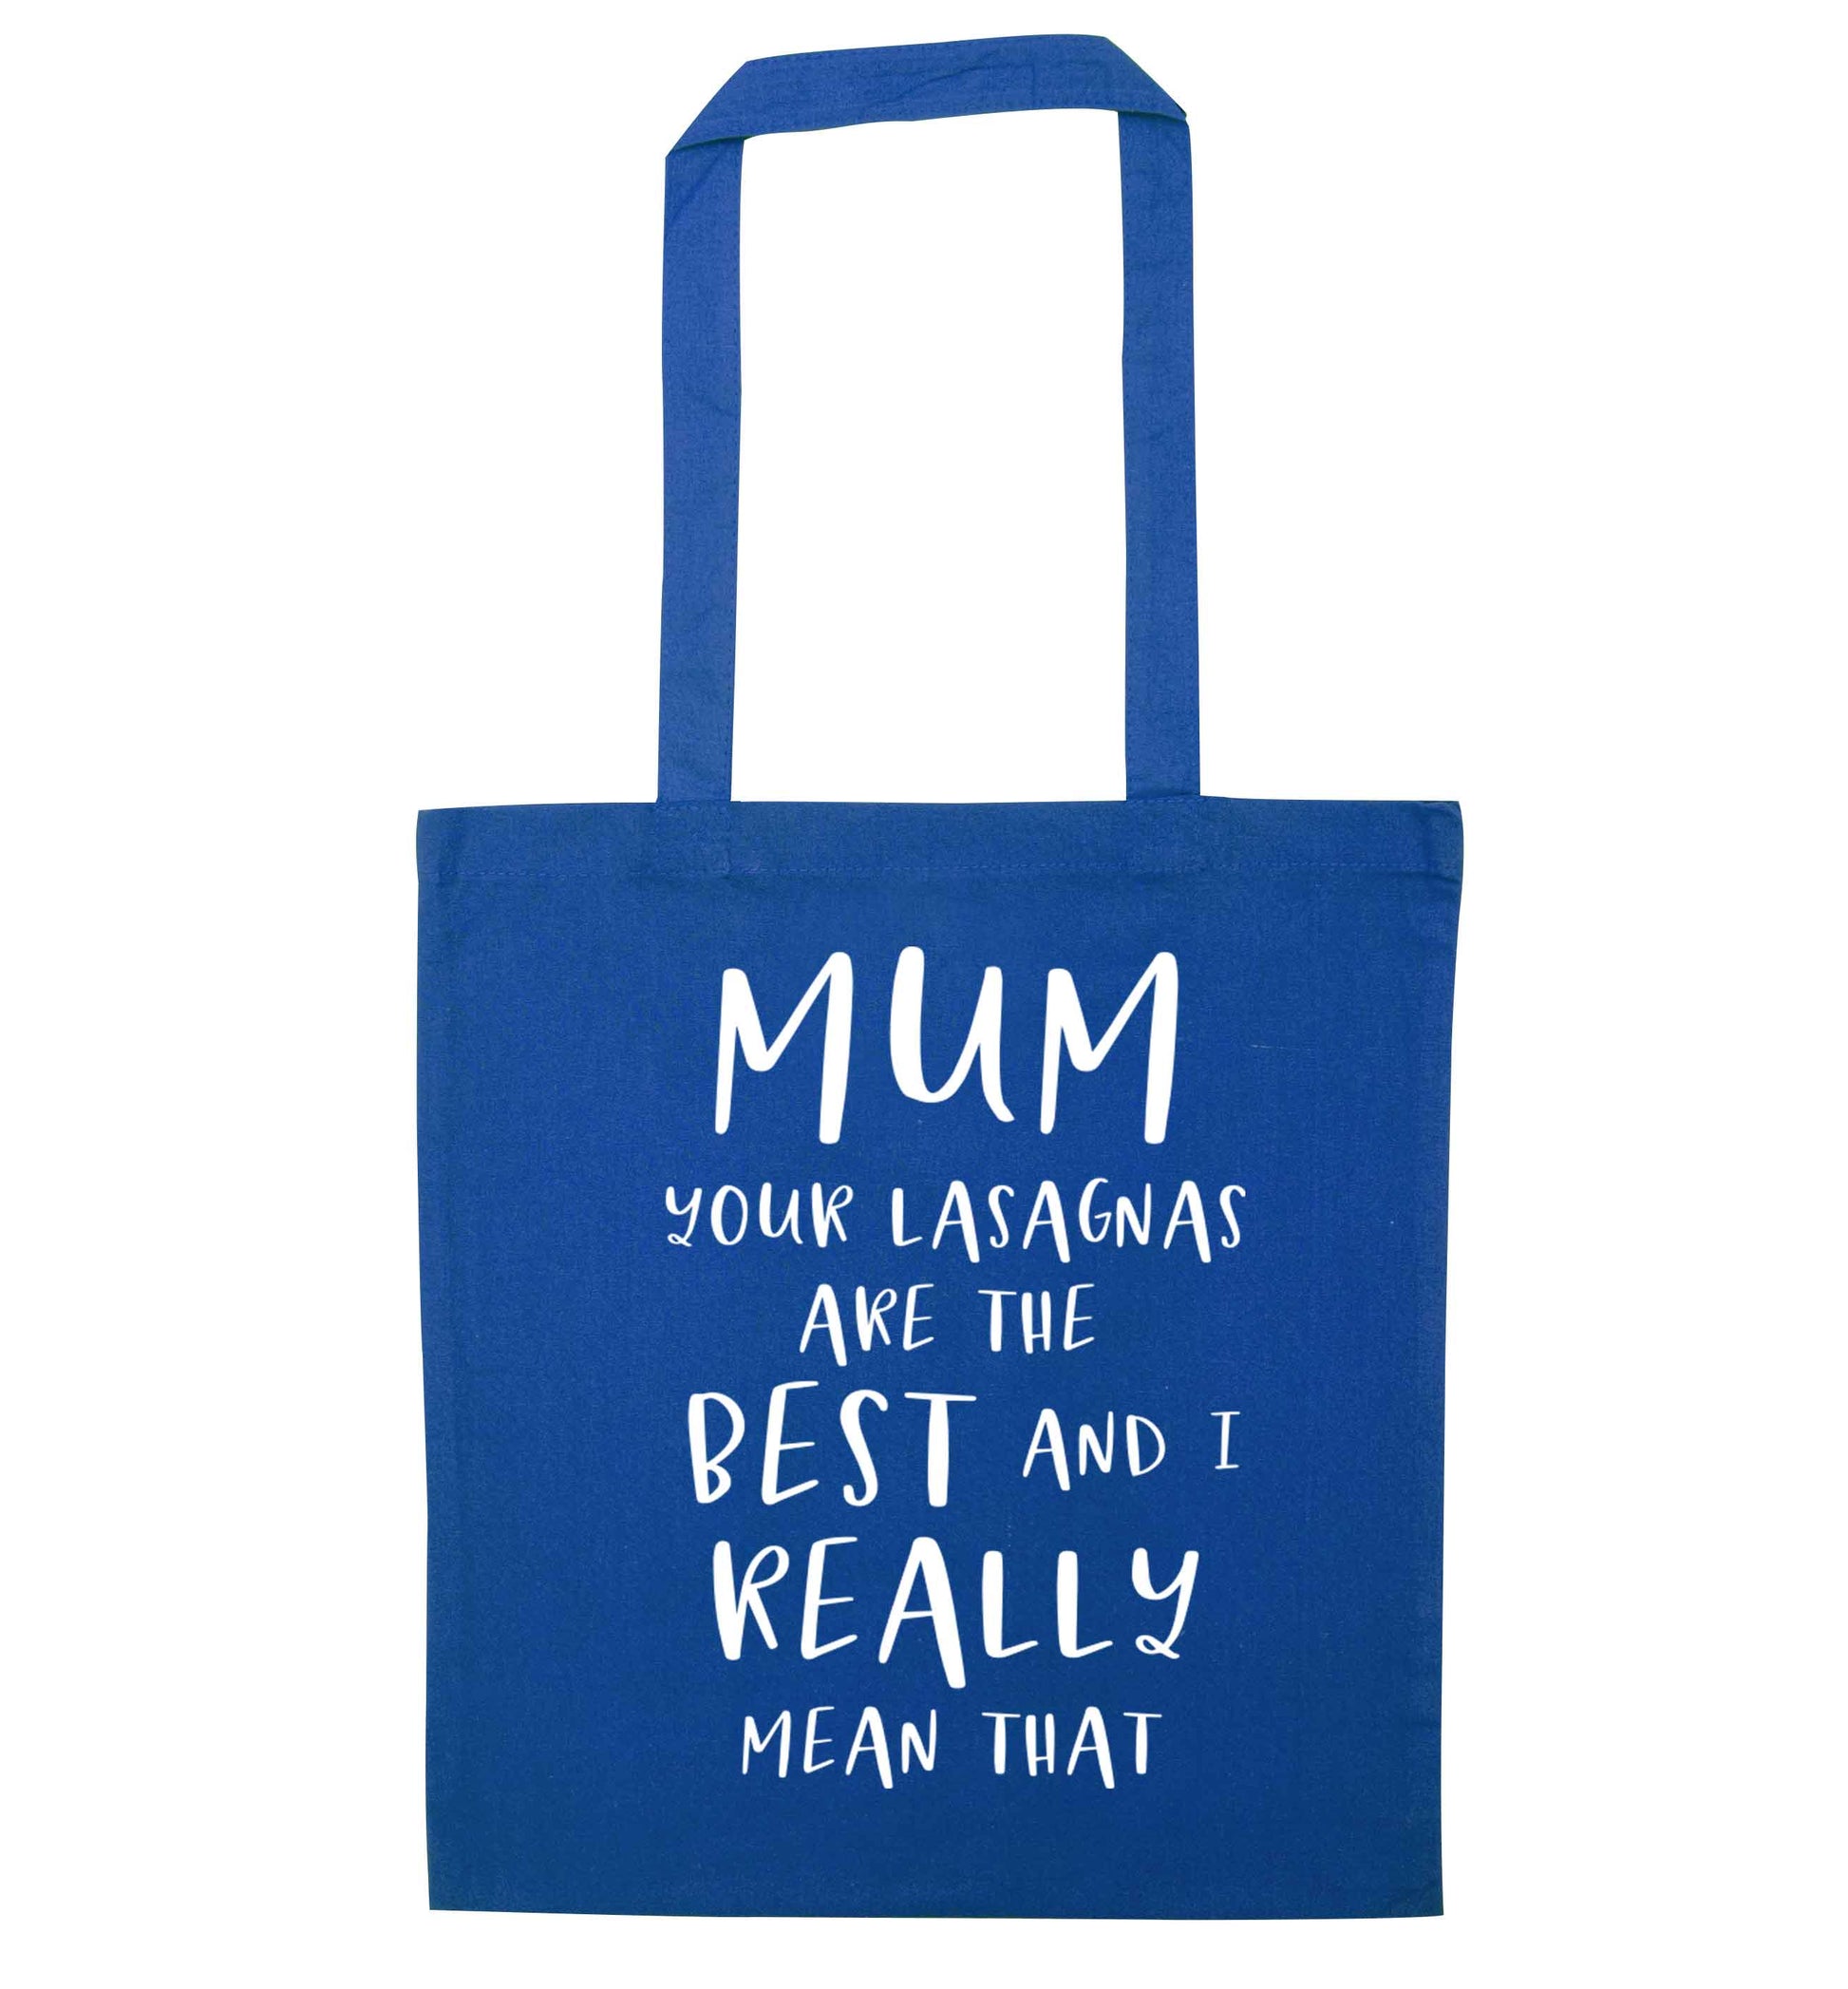 Funny gifts for your mum on mother's dayor her birthday! Mum your lasagnas are the best and I really mean that blue tote bag